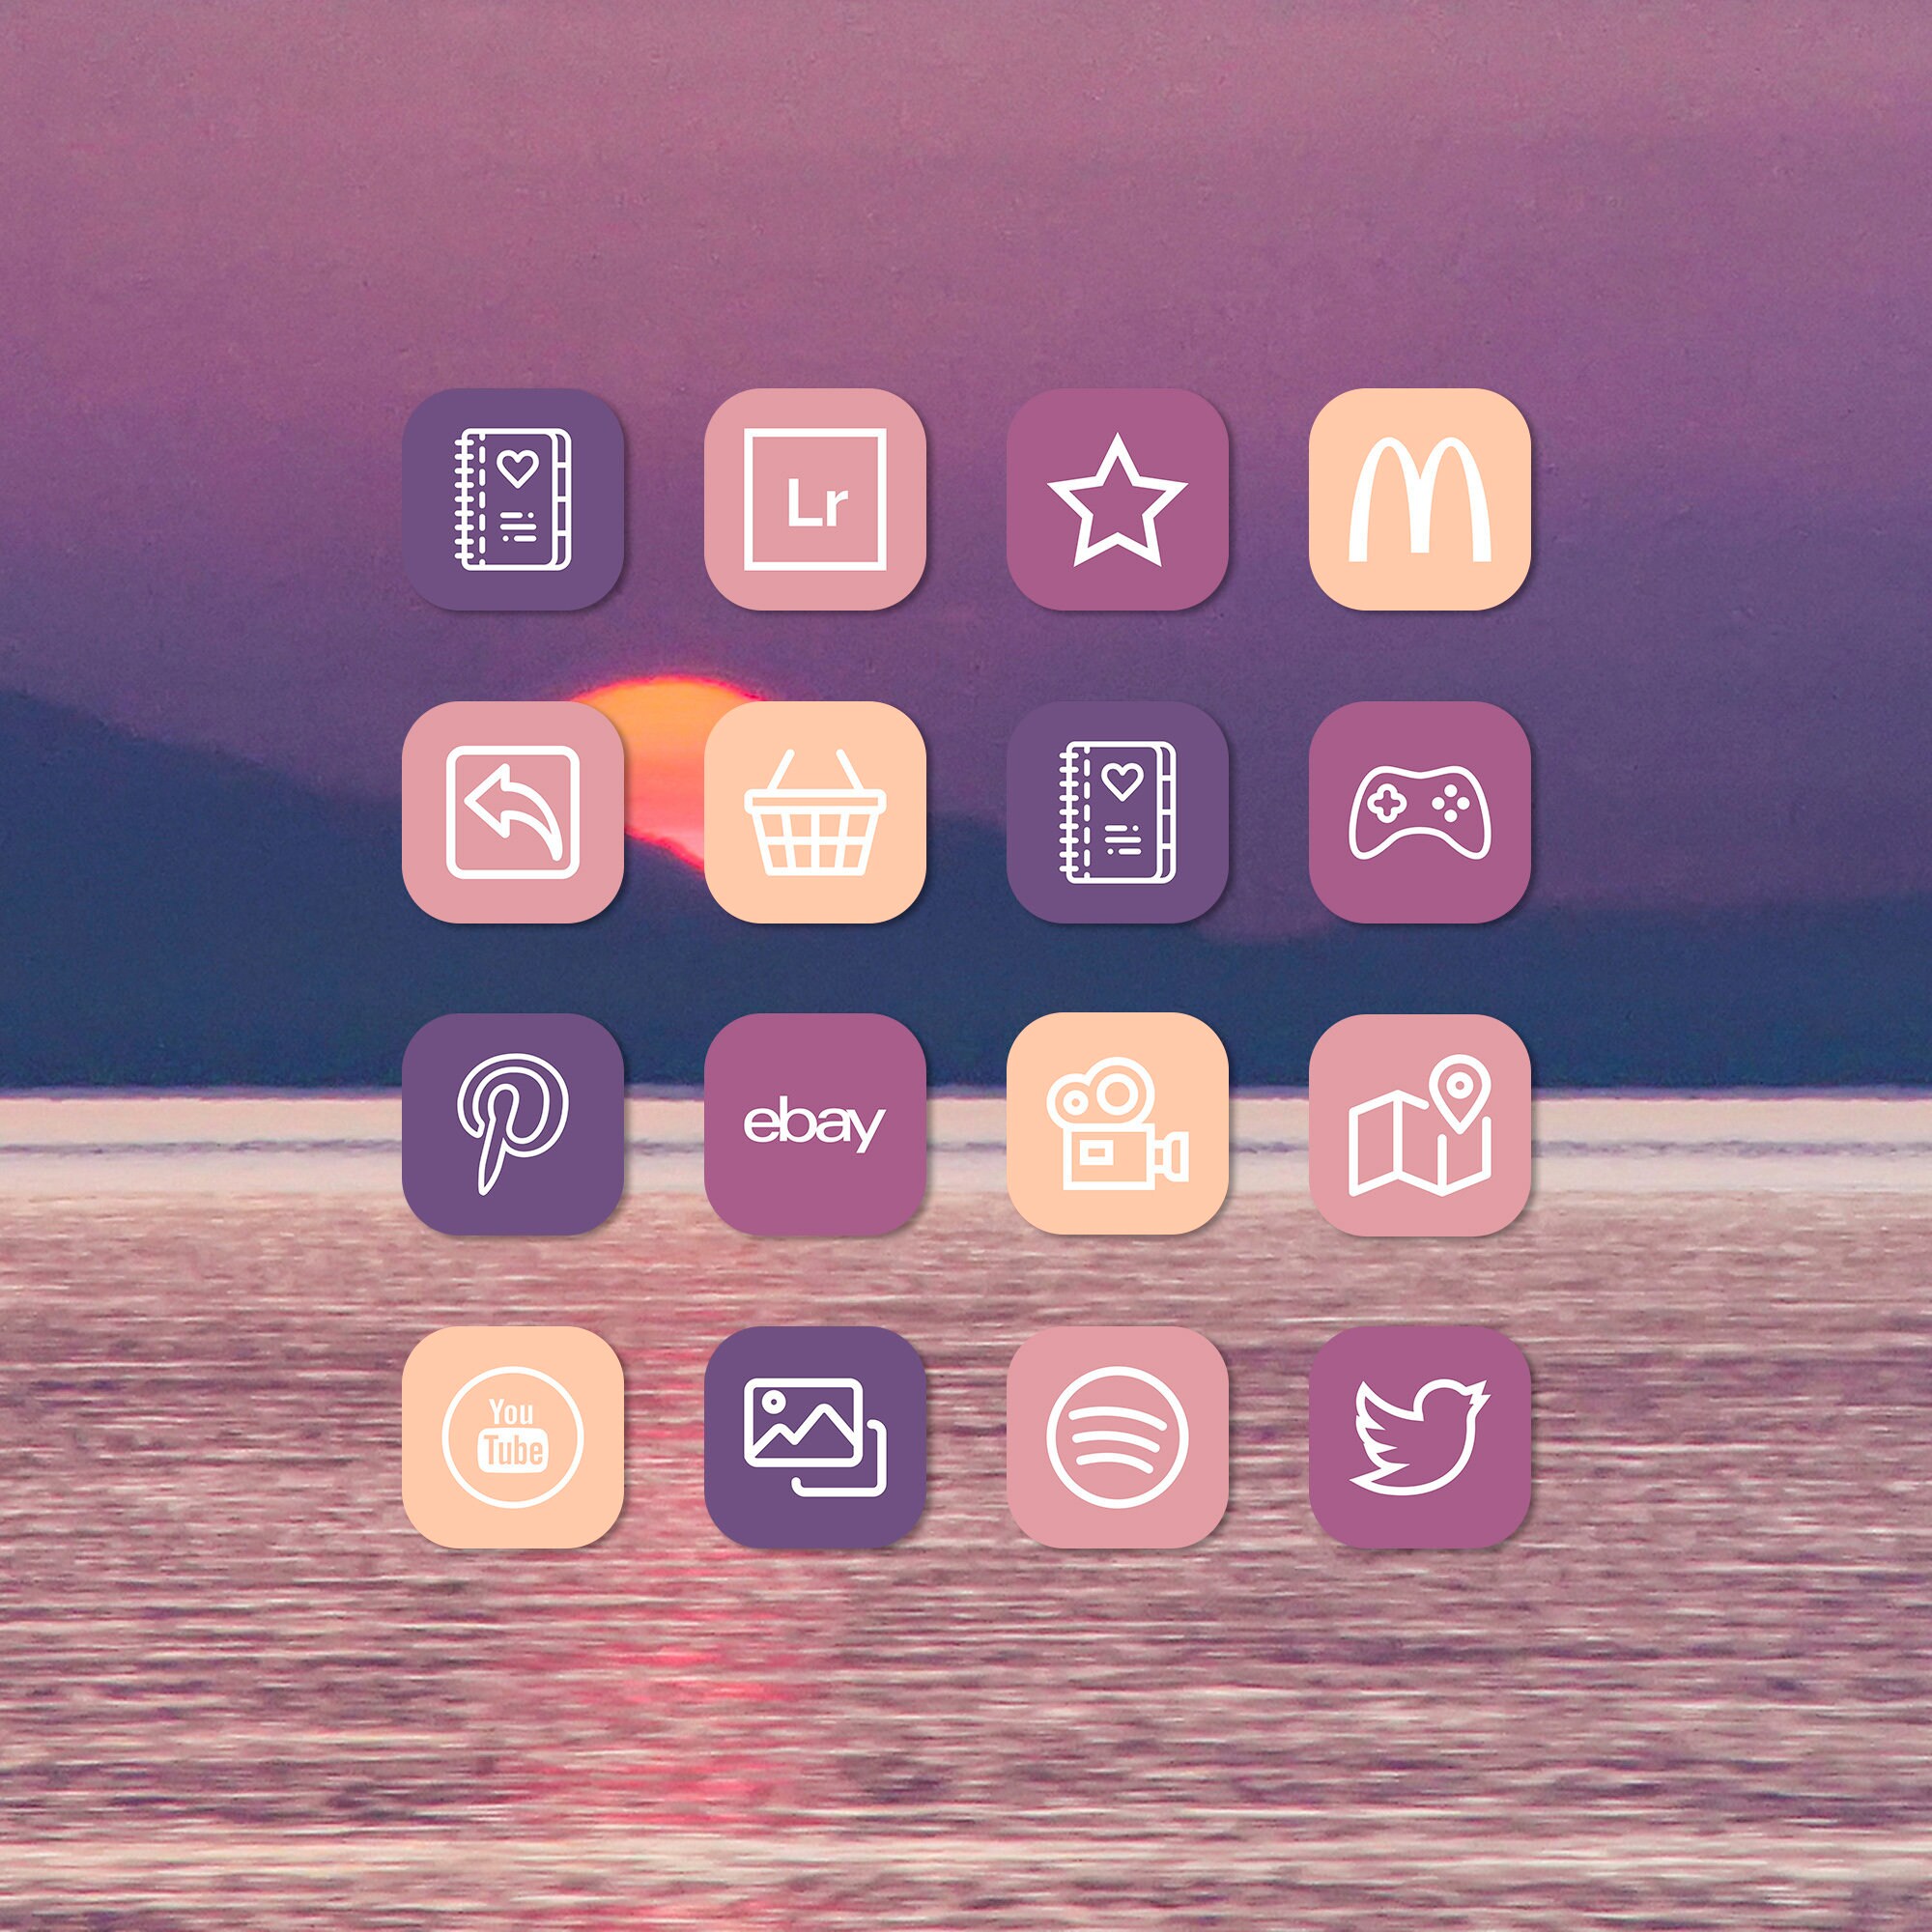 Sunrise app icons collection widget iphone home screen app | Etsy